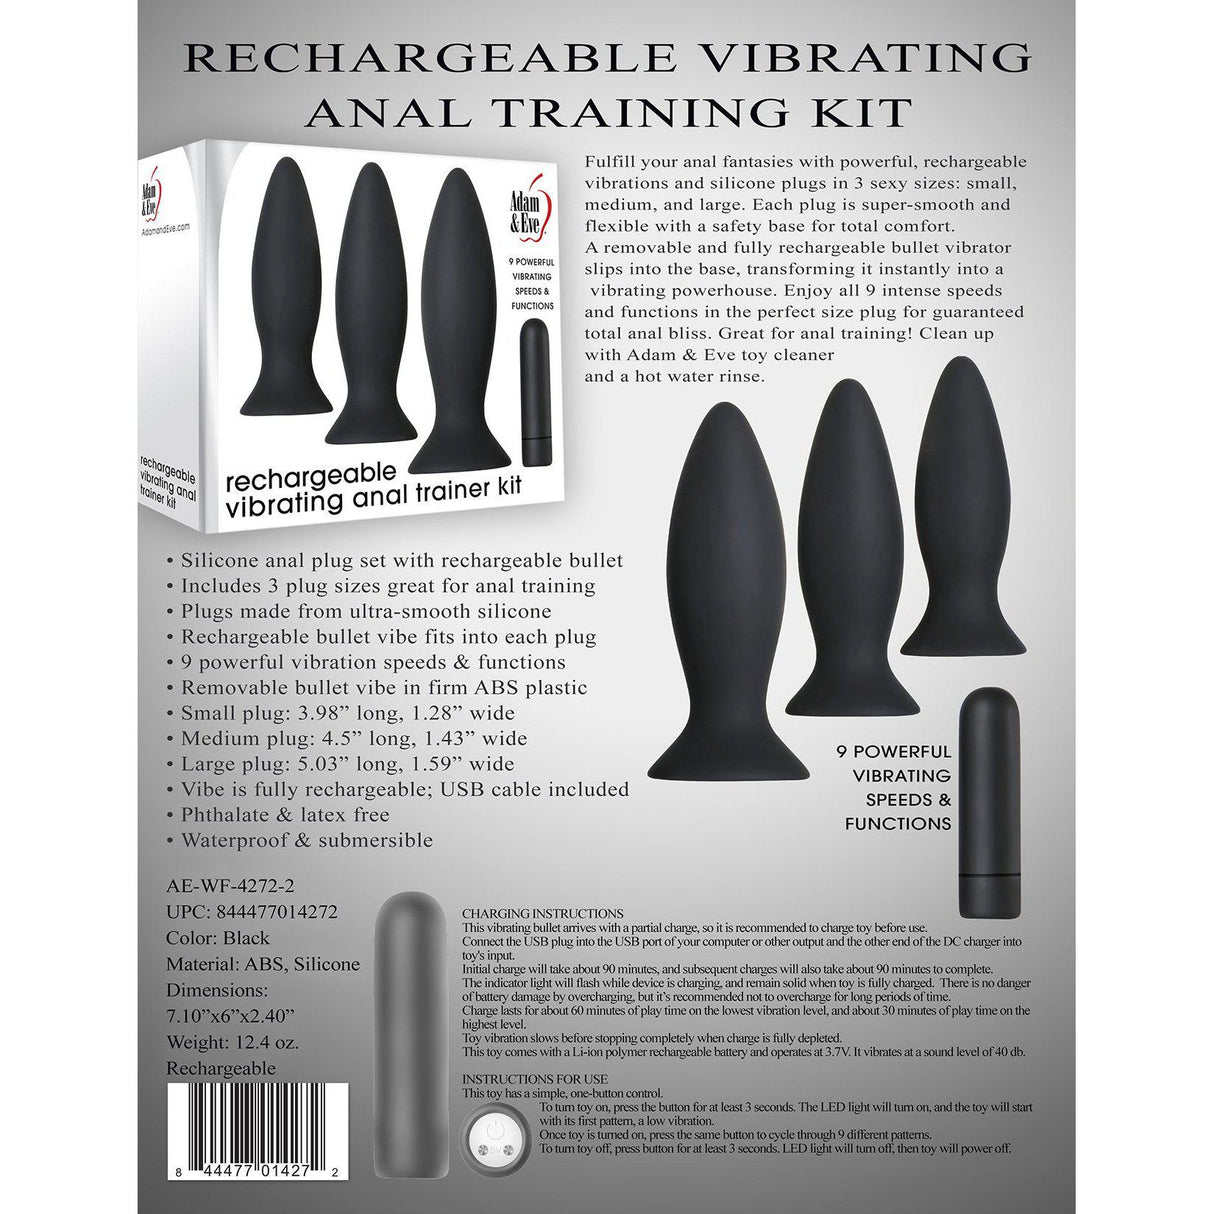 Adam & Eve Rechargeable Vibrating Anal Training Kit